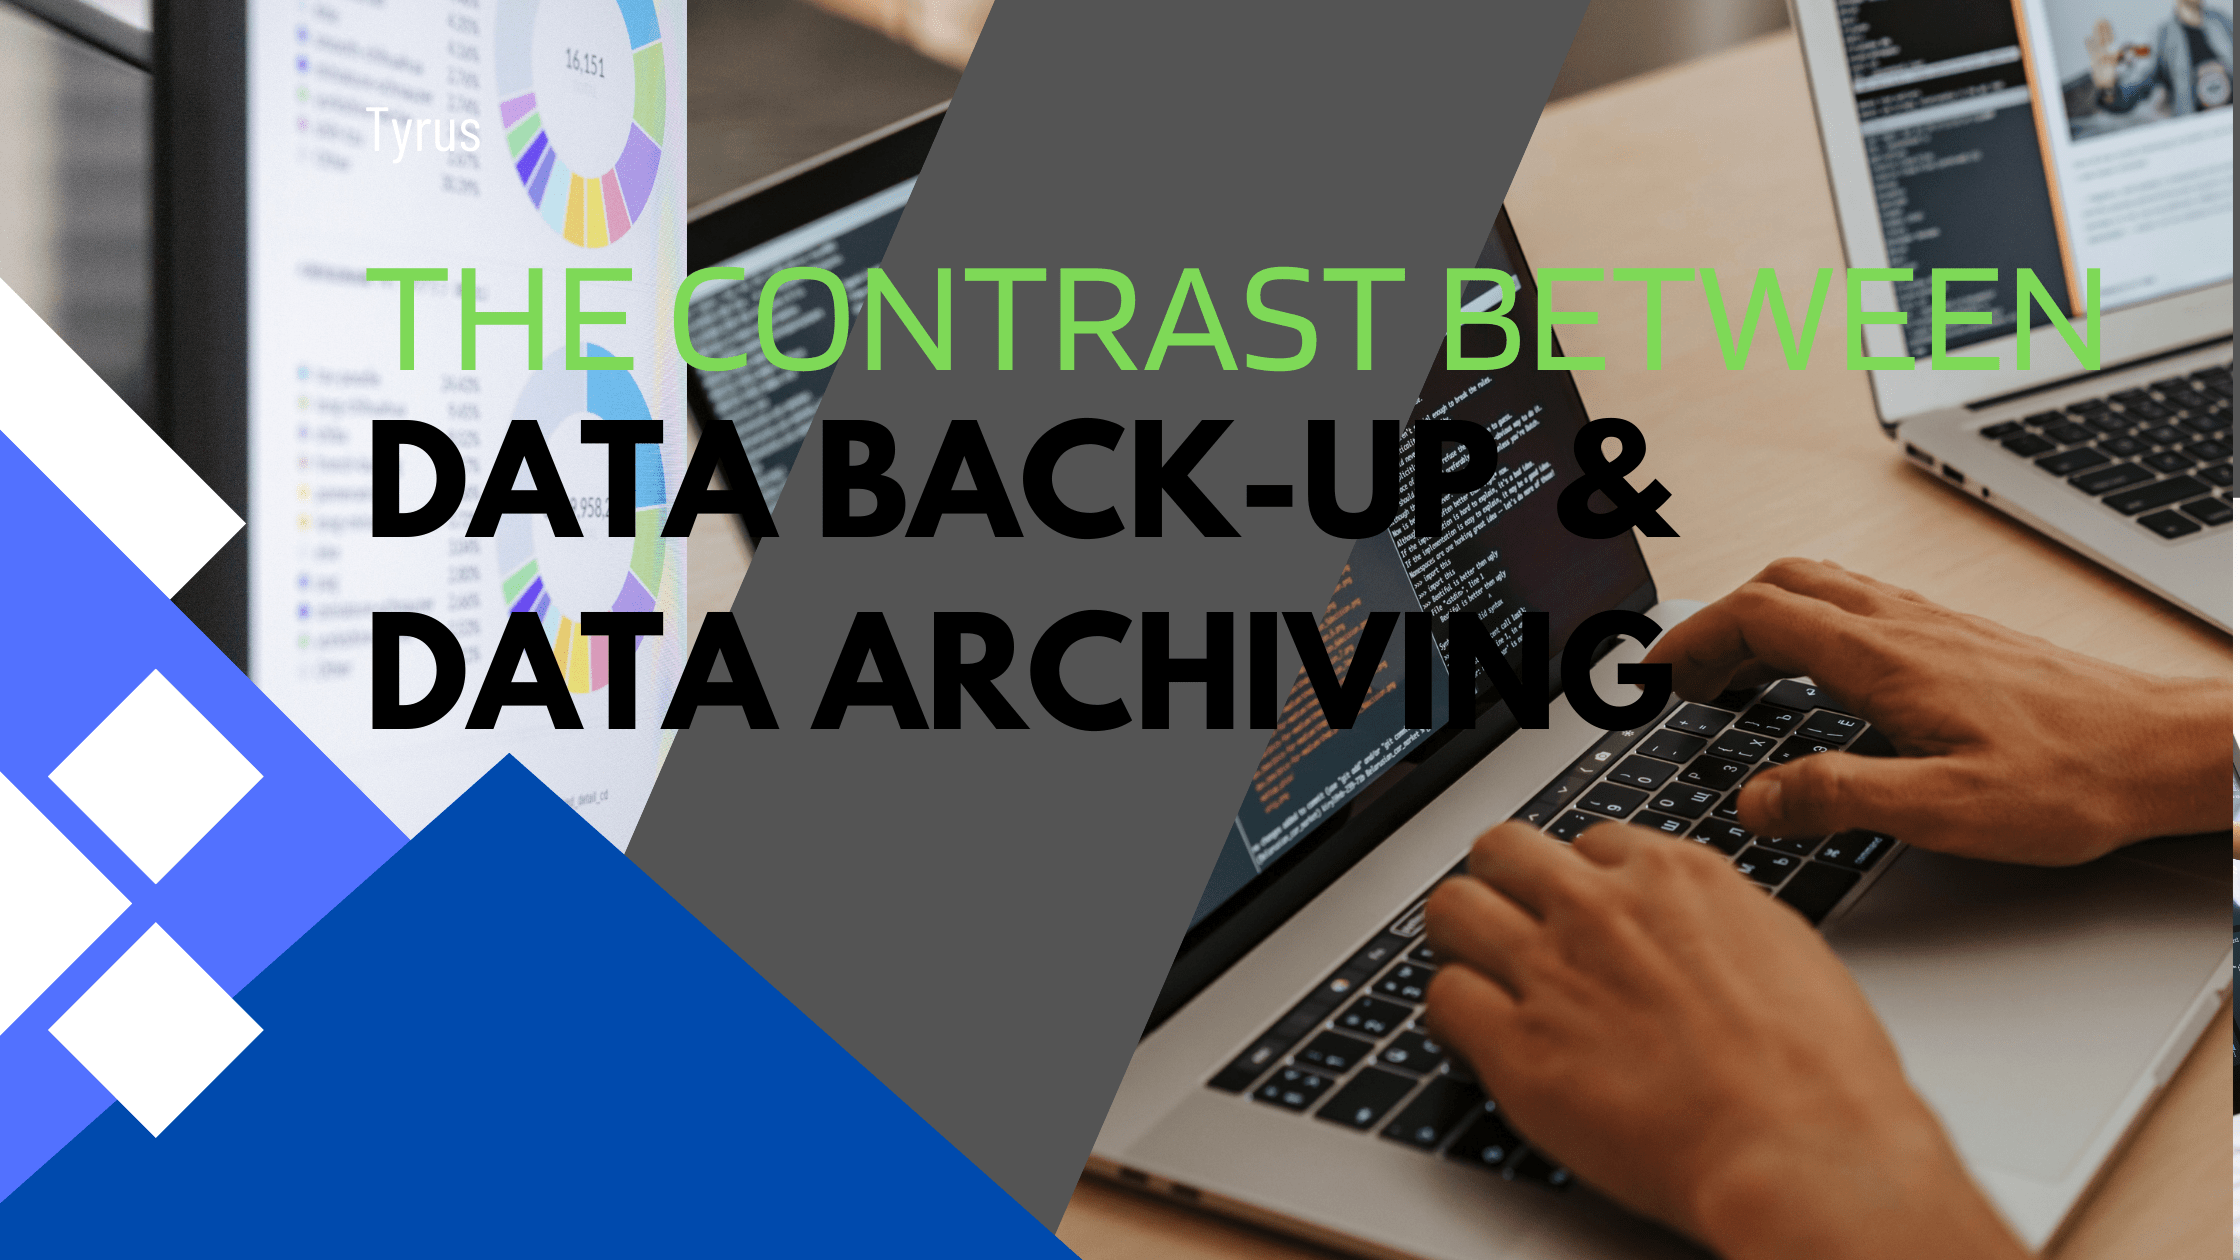 The Contrast Between Data Back-Up and Data Archiving